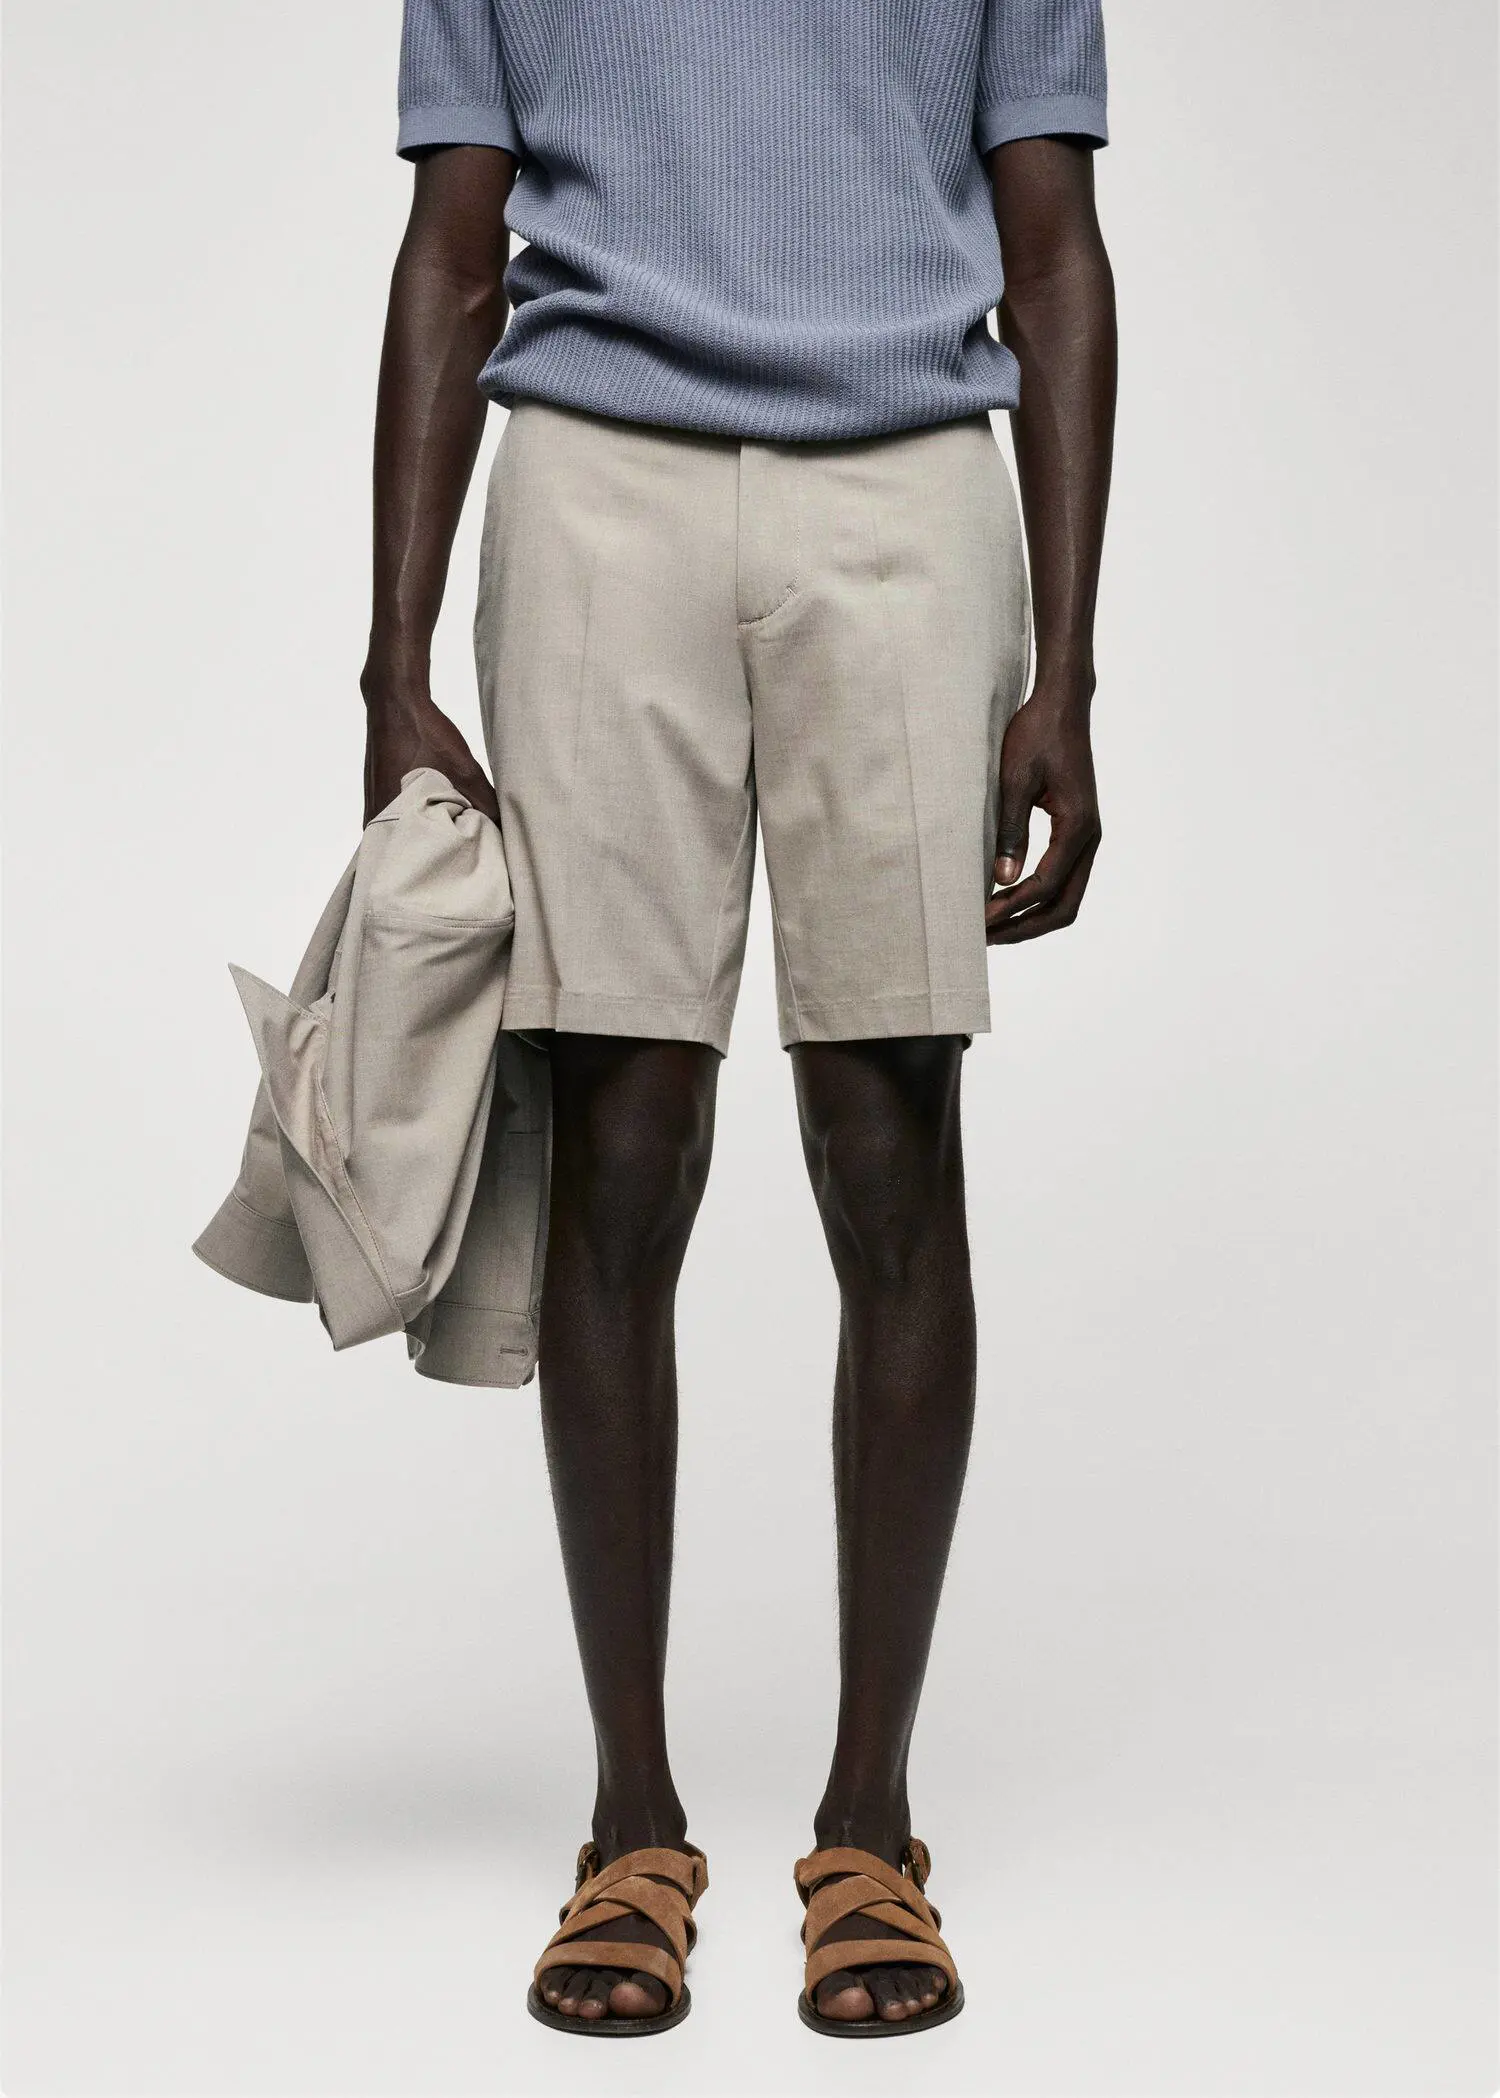 Mango Slim-fit bermuda shorts with adjustable waist. a man in shorts holding a jacket in front of him. 